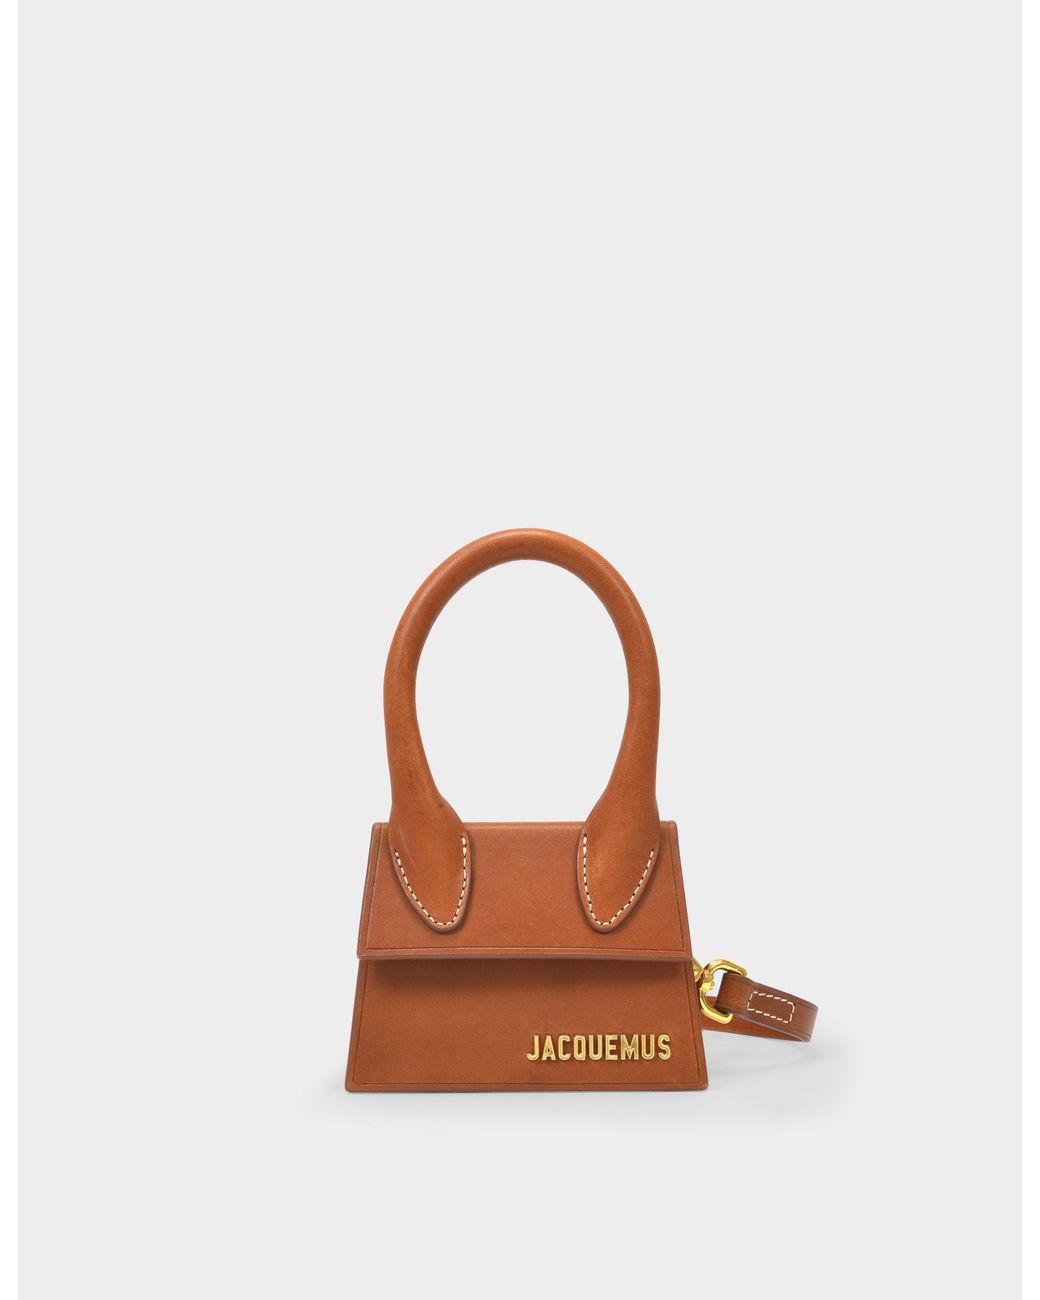 Jacquemus Le Chiquito Bag In Brown Leather | Lyst